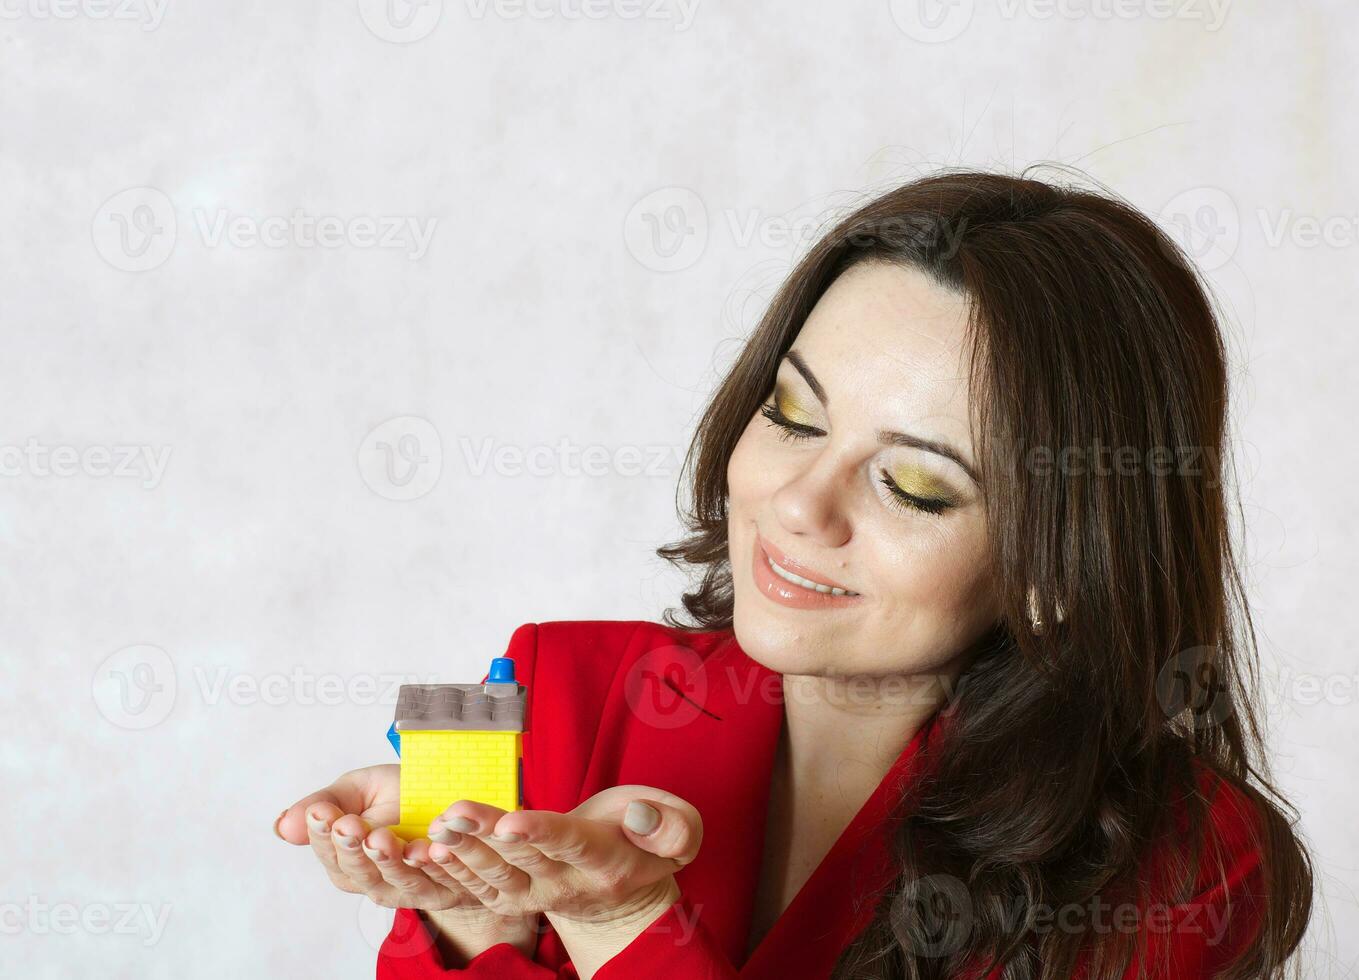 A lady keeps a small rubber house photo